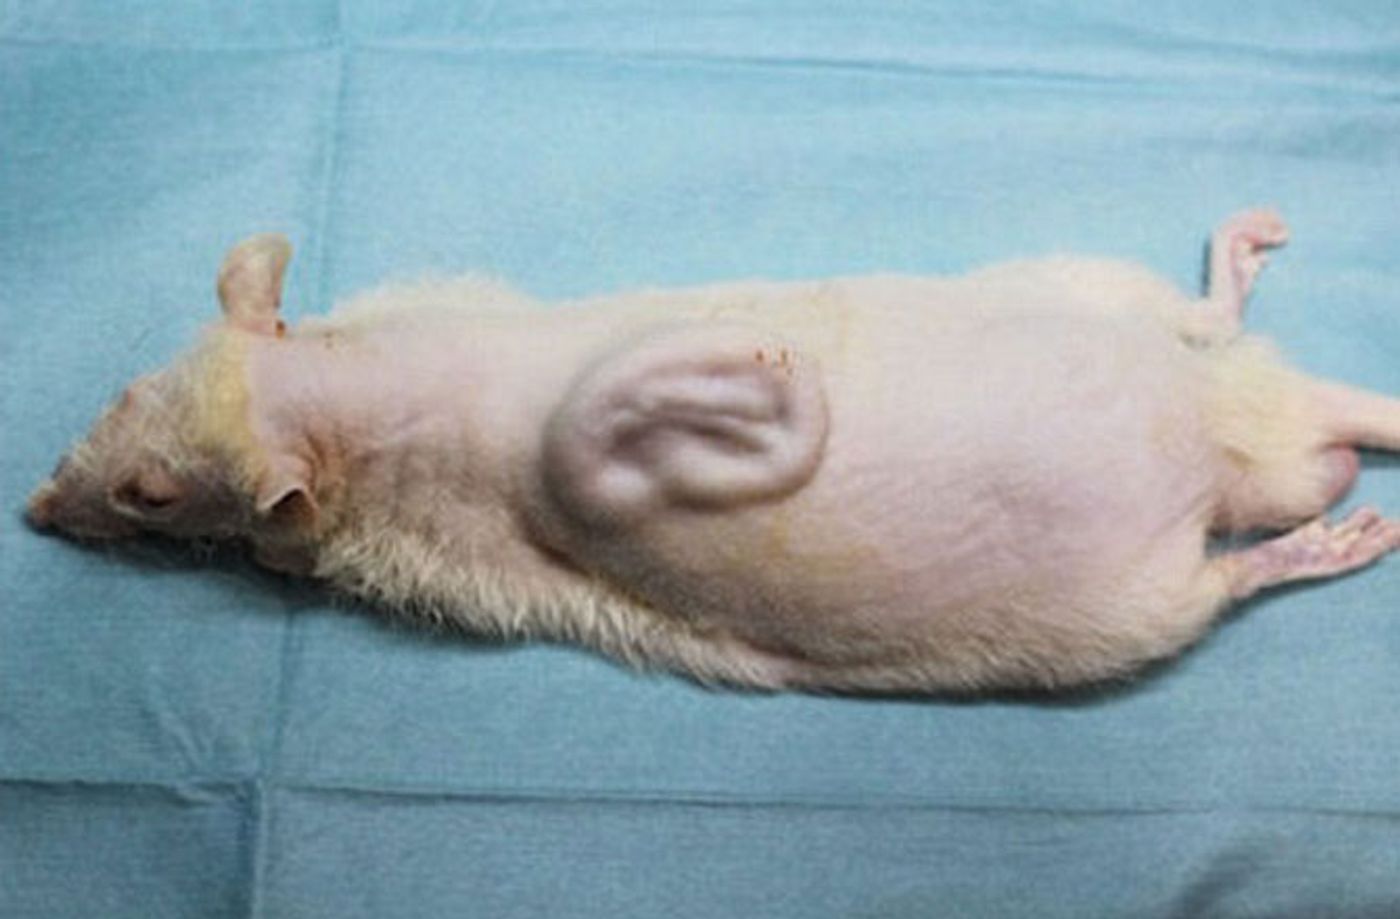 Researchers in Japan have grown a human ear on the back of a lab rat with stem cells.